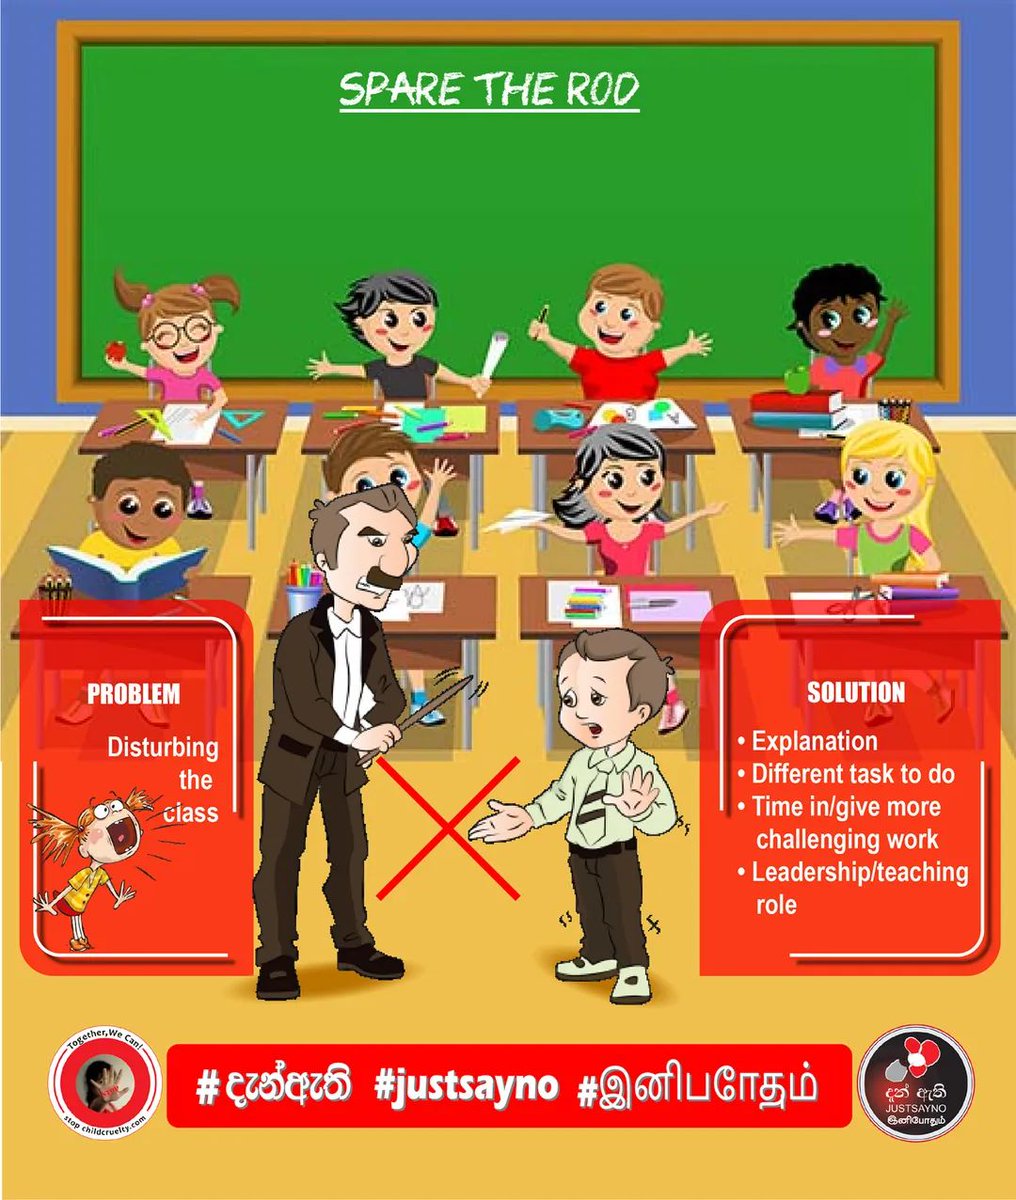 Remembering how it felt to be a child can help you understand children.
Positive discipline is a way of teaching and guiding children by letting them know what behavior is acceptable in a way that is firm, yet kind.

#දැන්ඇති #justsayno #noගුටි